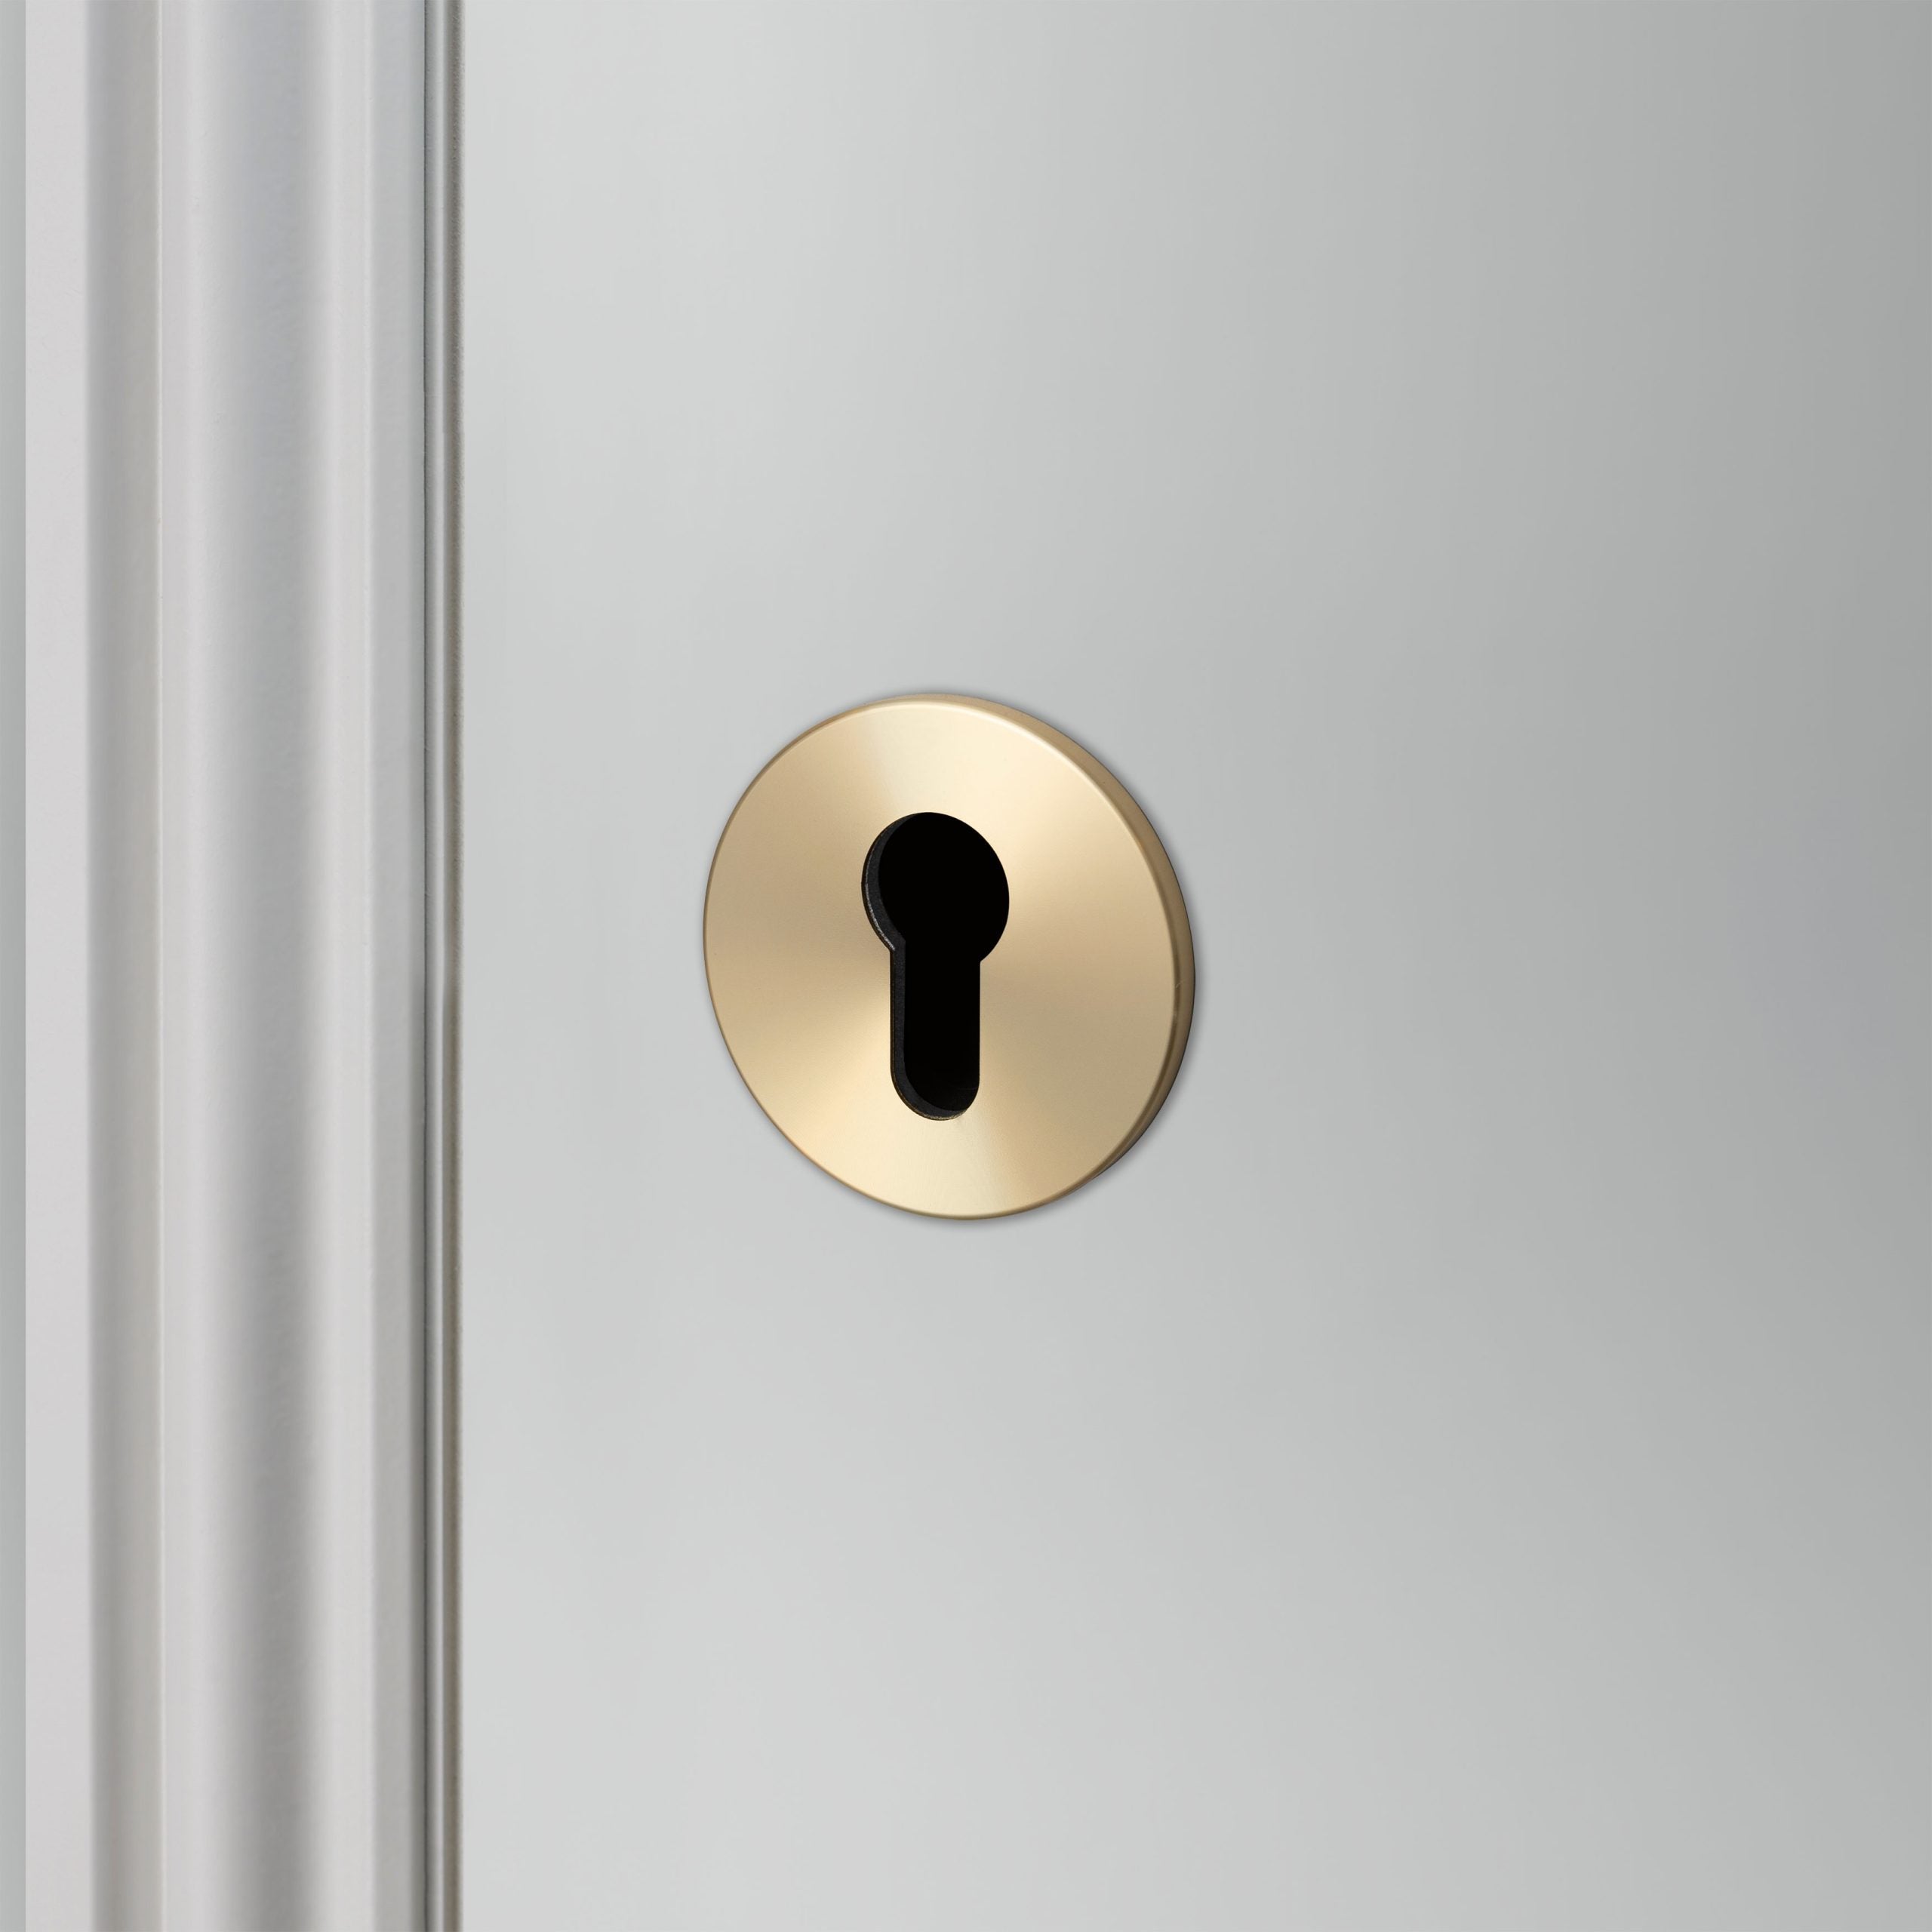 The Euro Cylinder Key Escutcheon | By Buster + Punch